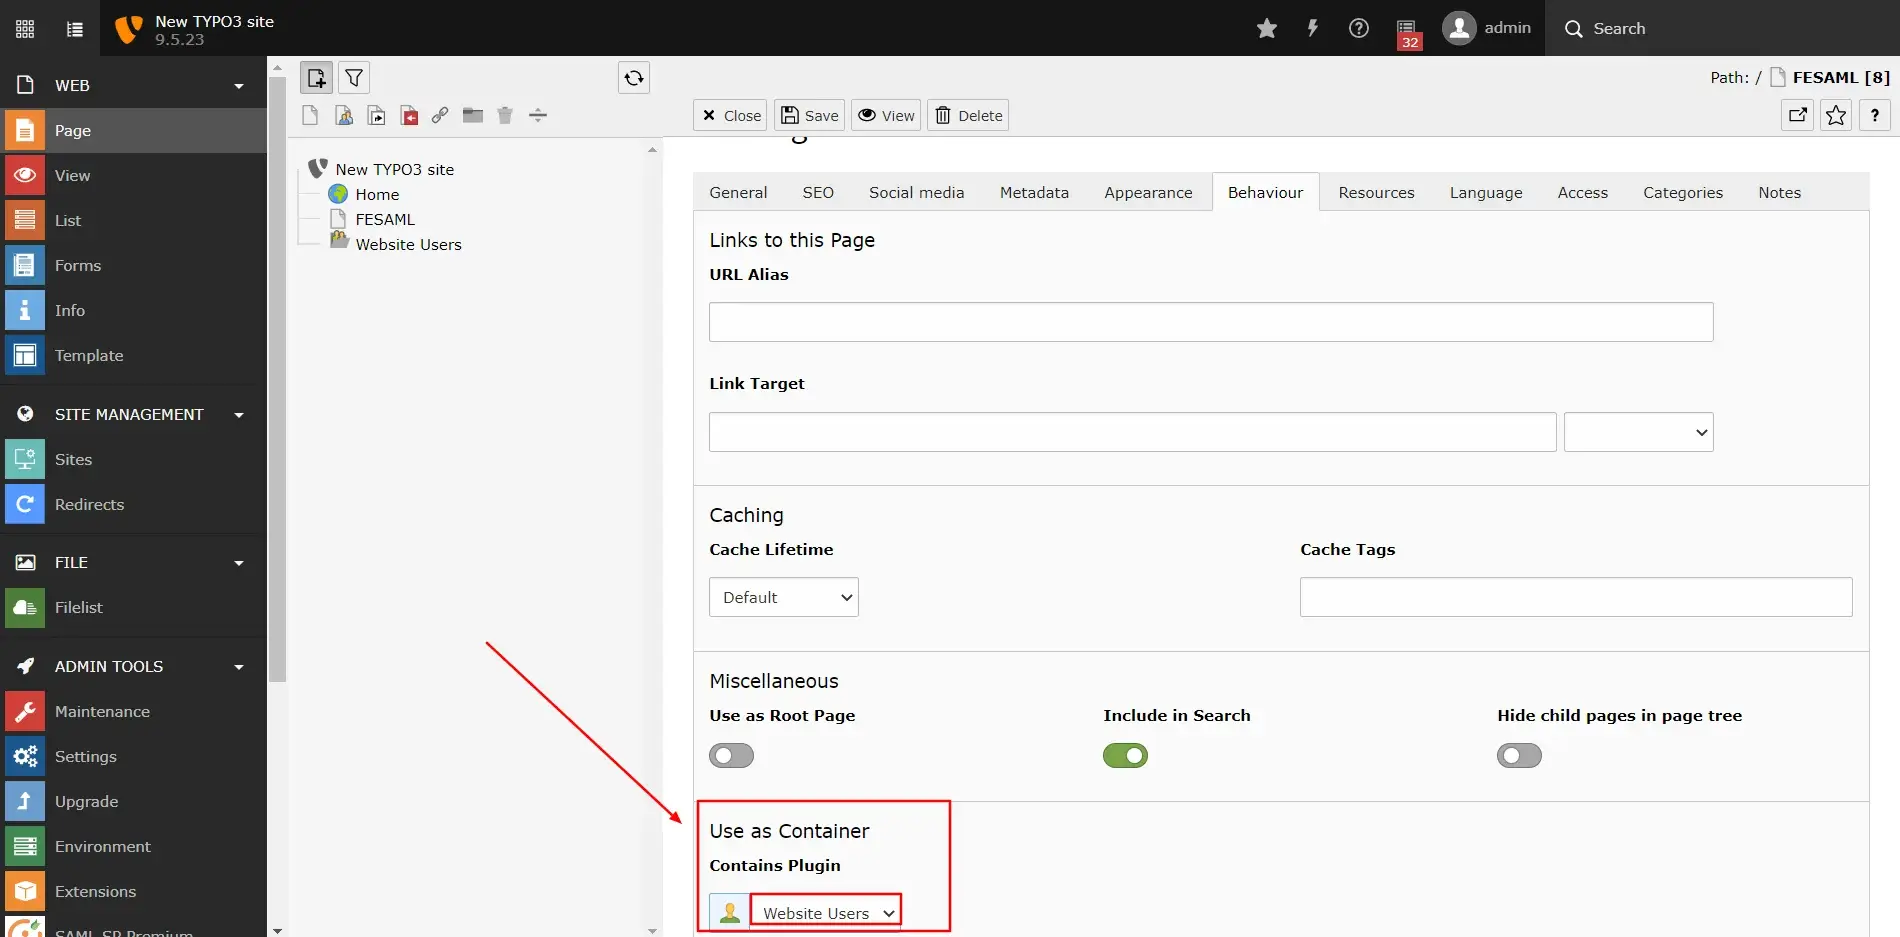 Add Plugin and include website users to Single Sign-on